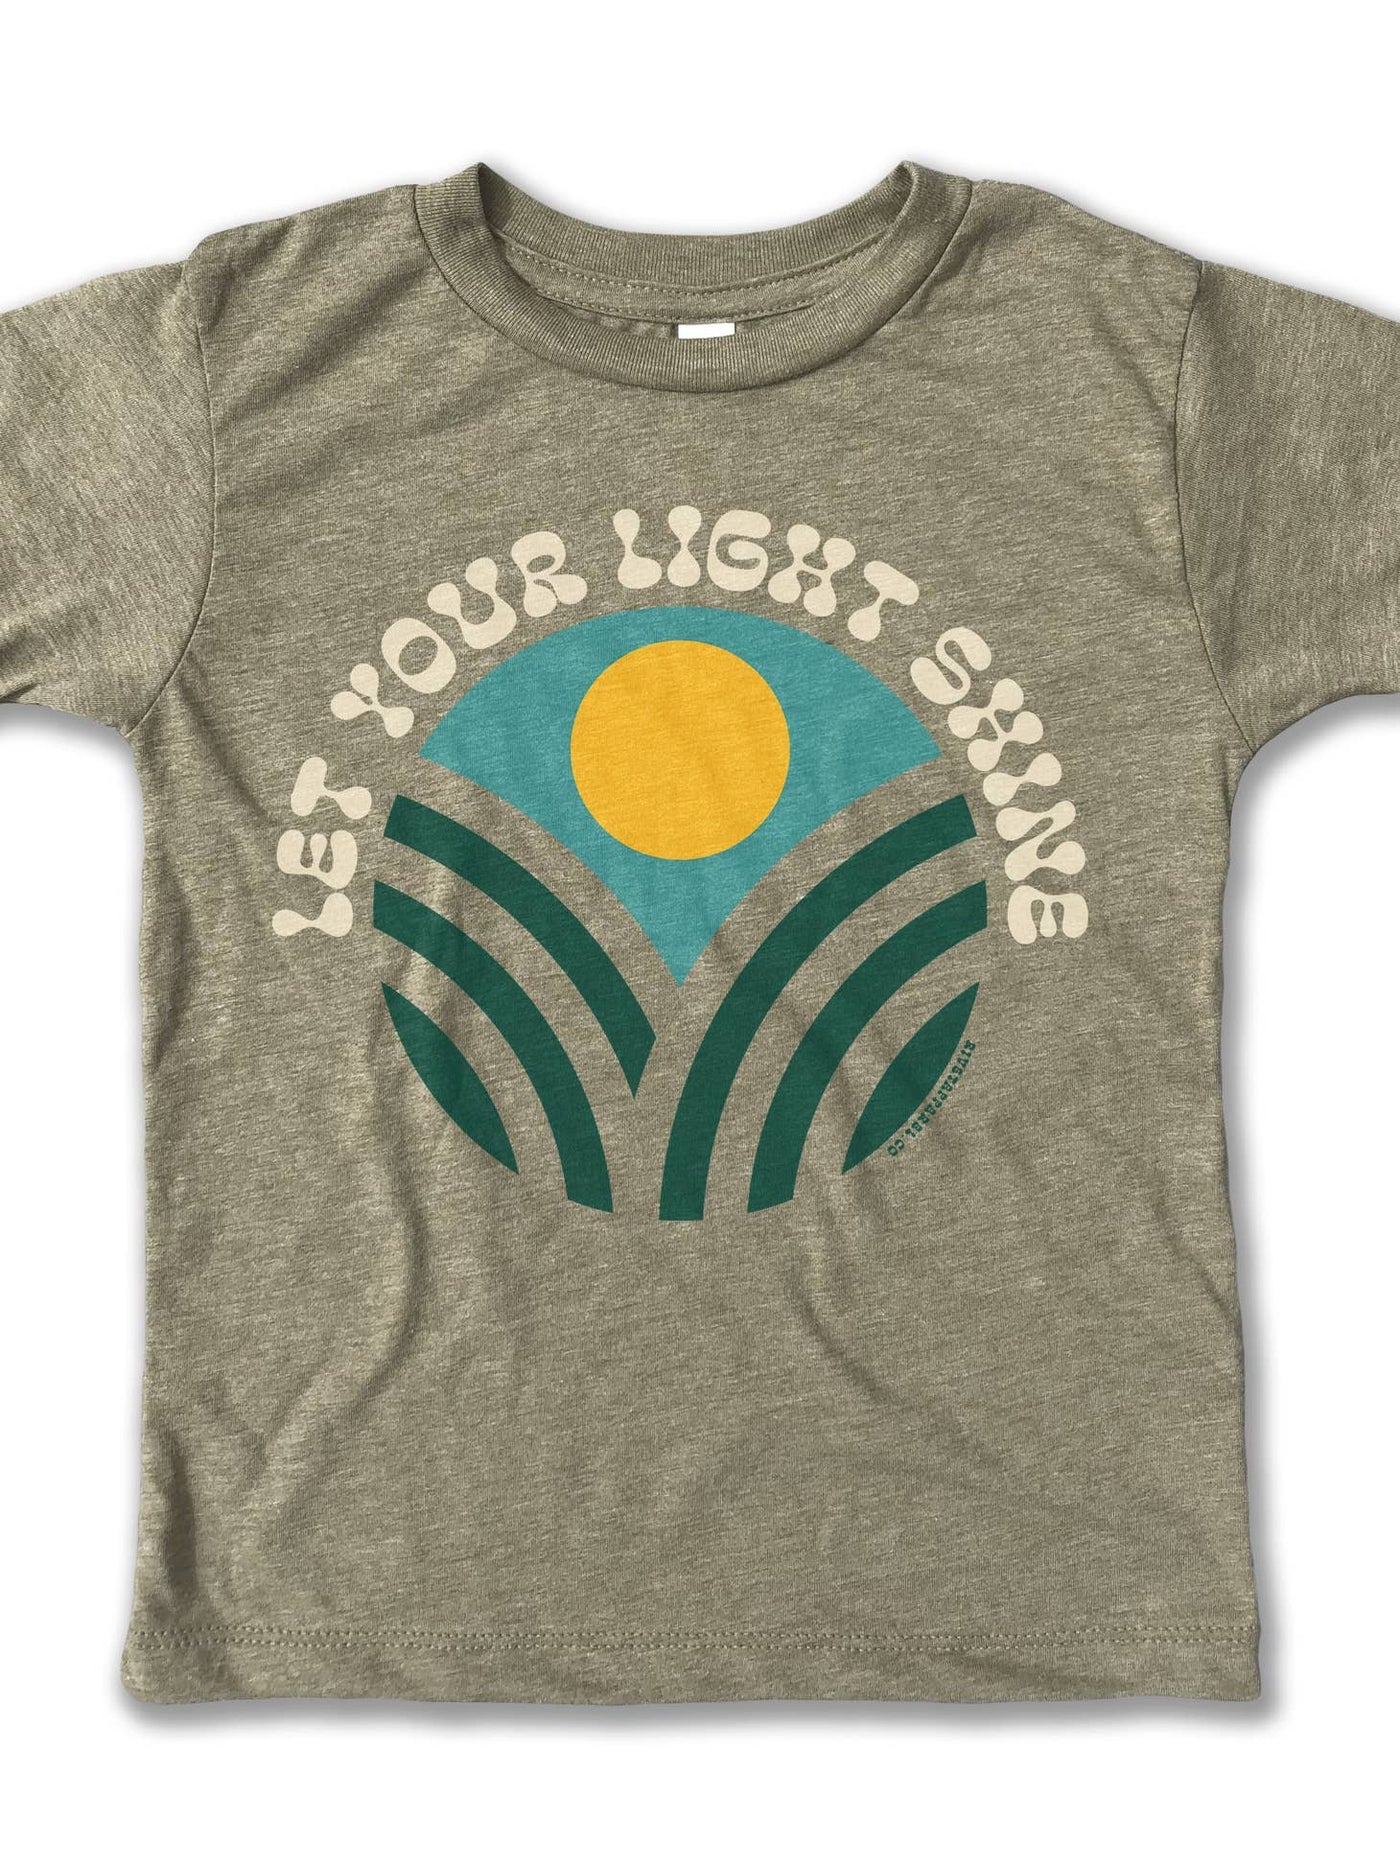 Let Your Light Shine Kid's Tee